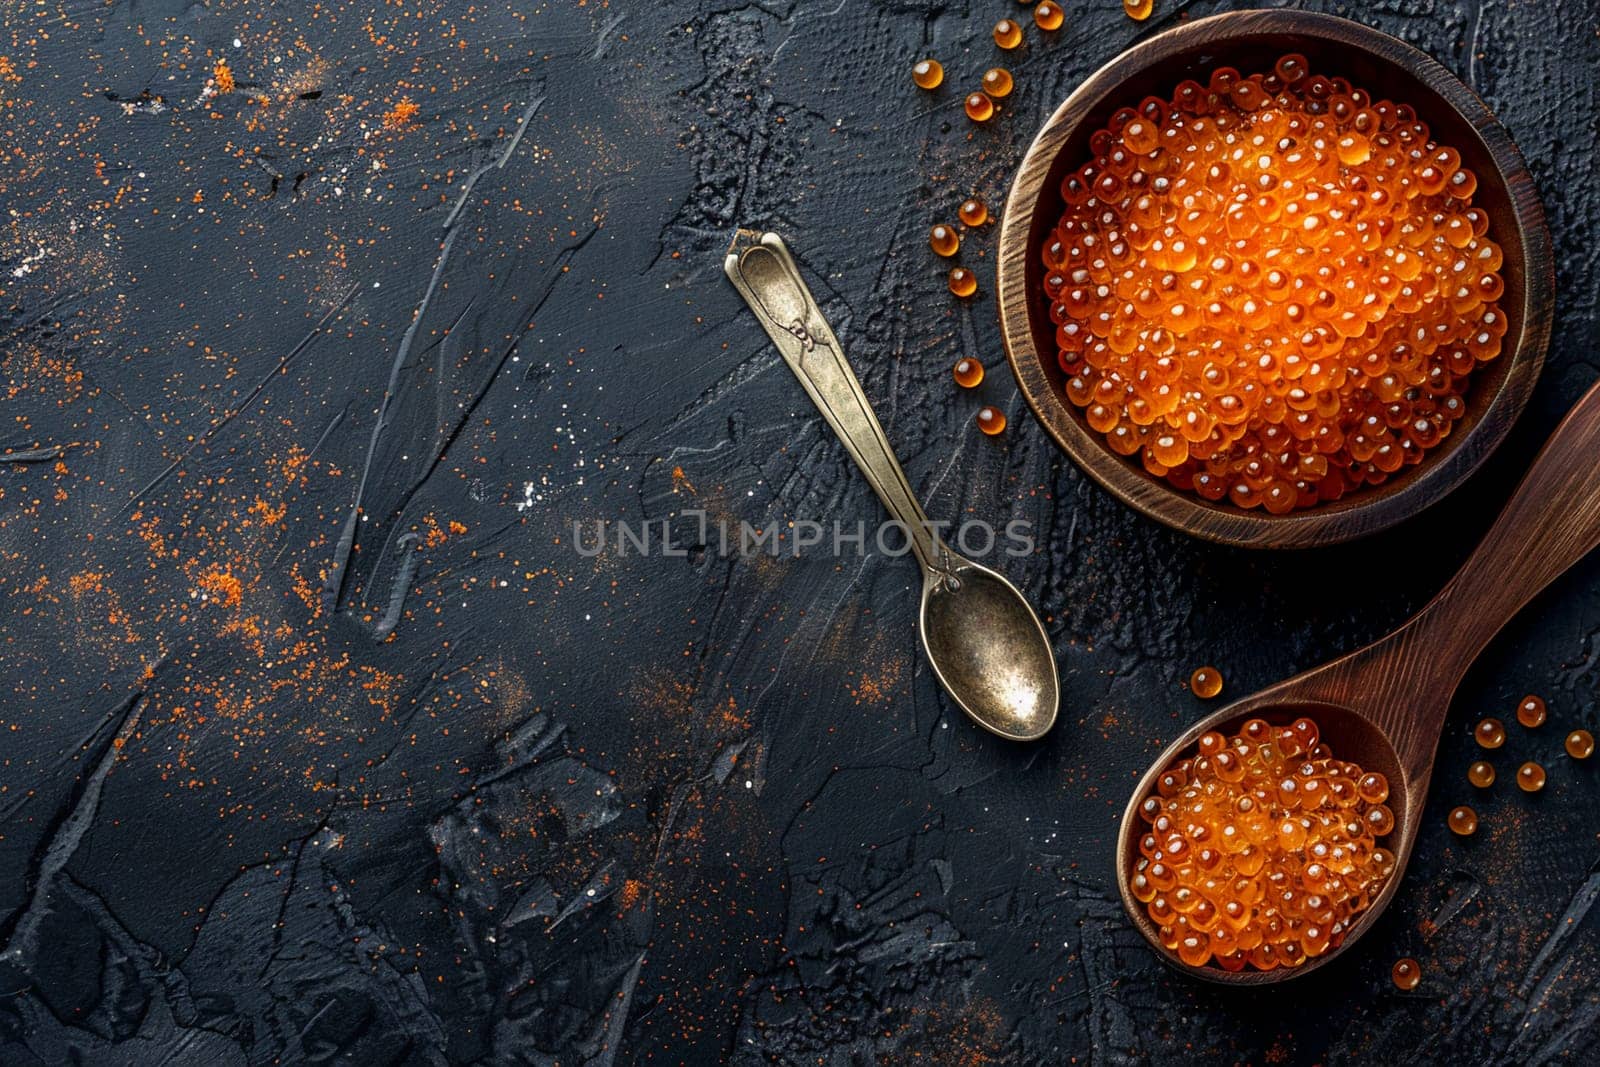 Top view of salmon caviar in wooden bowls with spoon on textured dark surface. Concept of luxury gourmet food, seafood delicacies, and Russian cuisine.